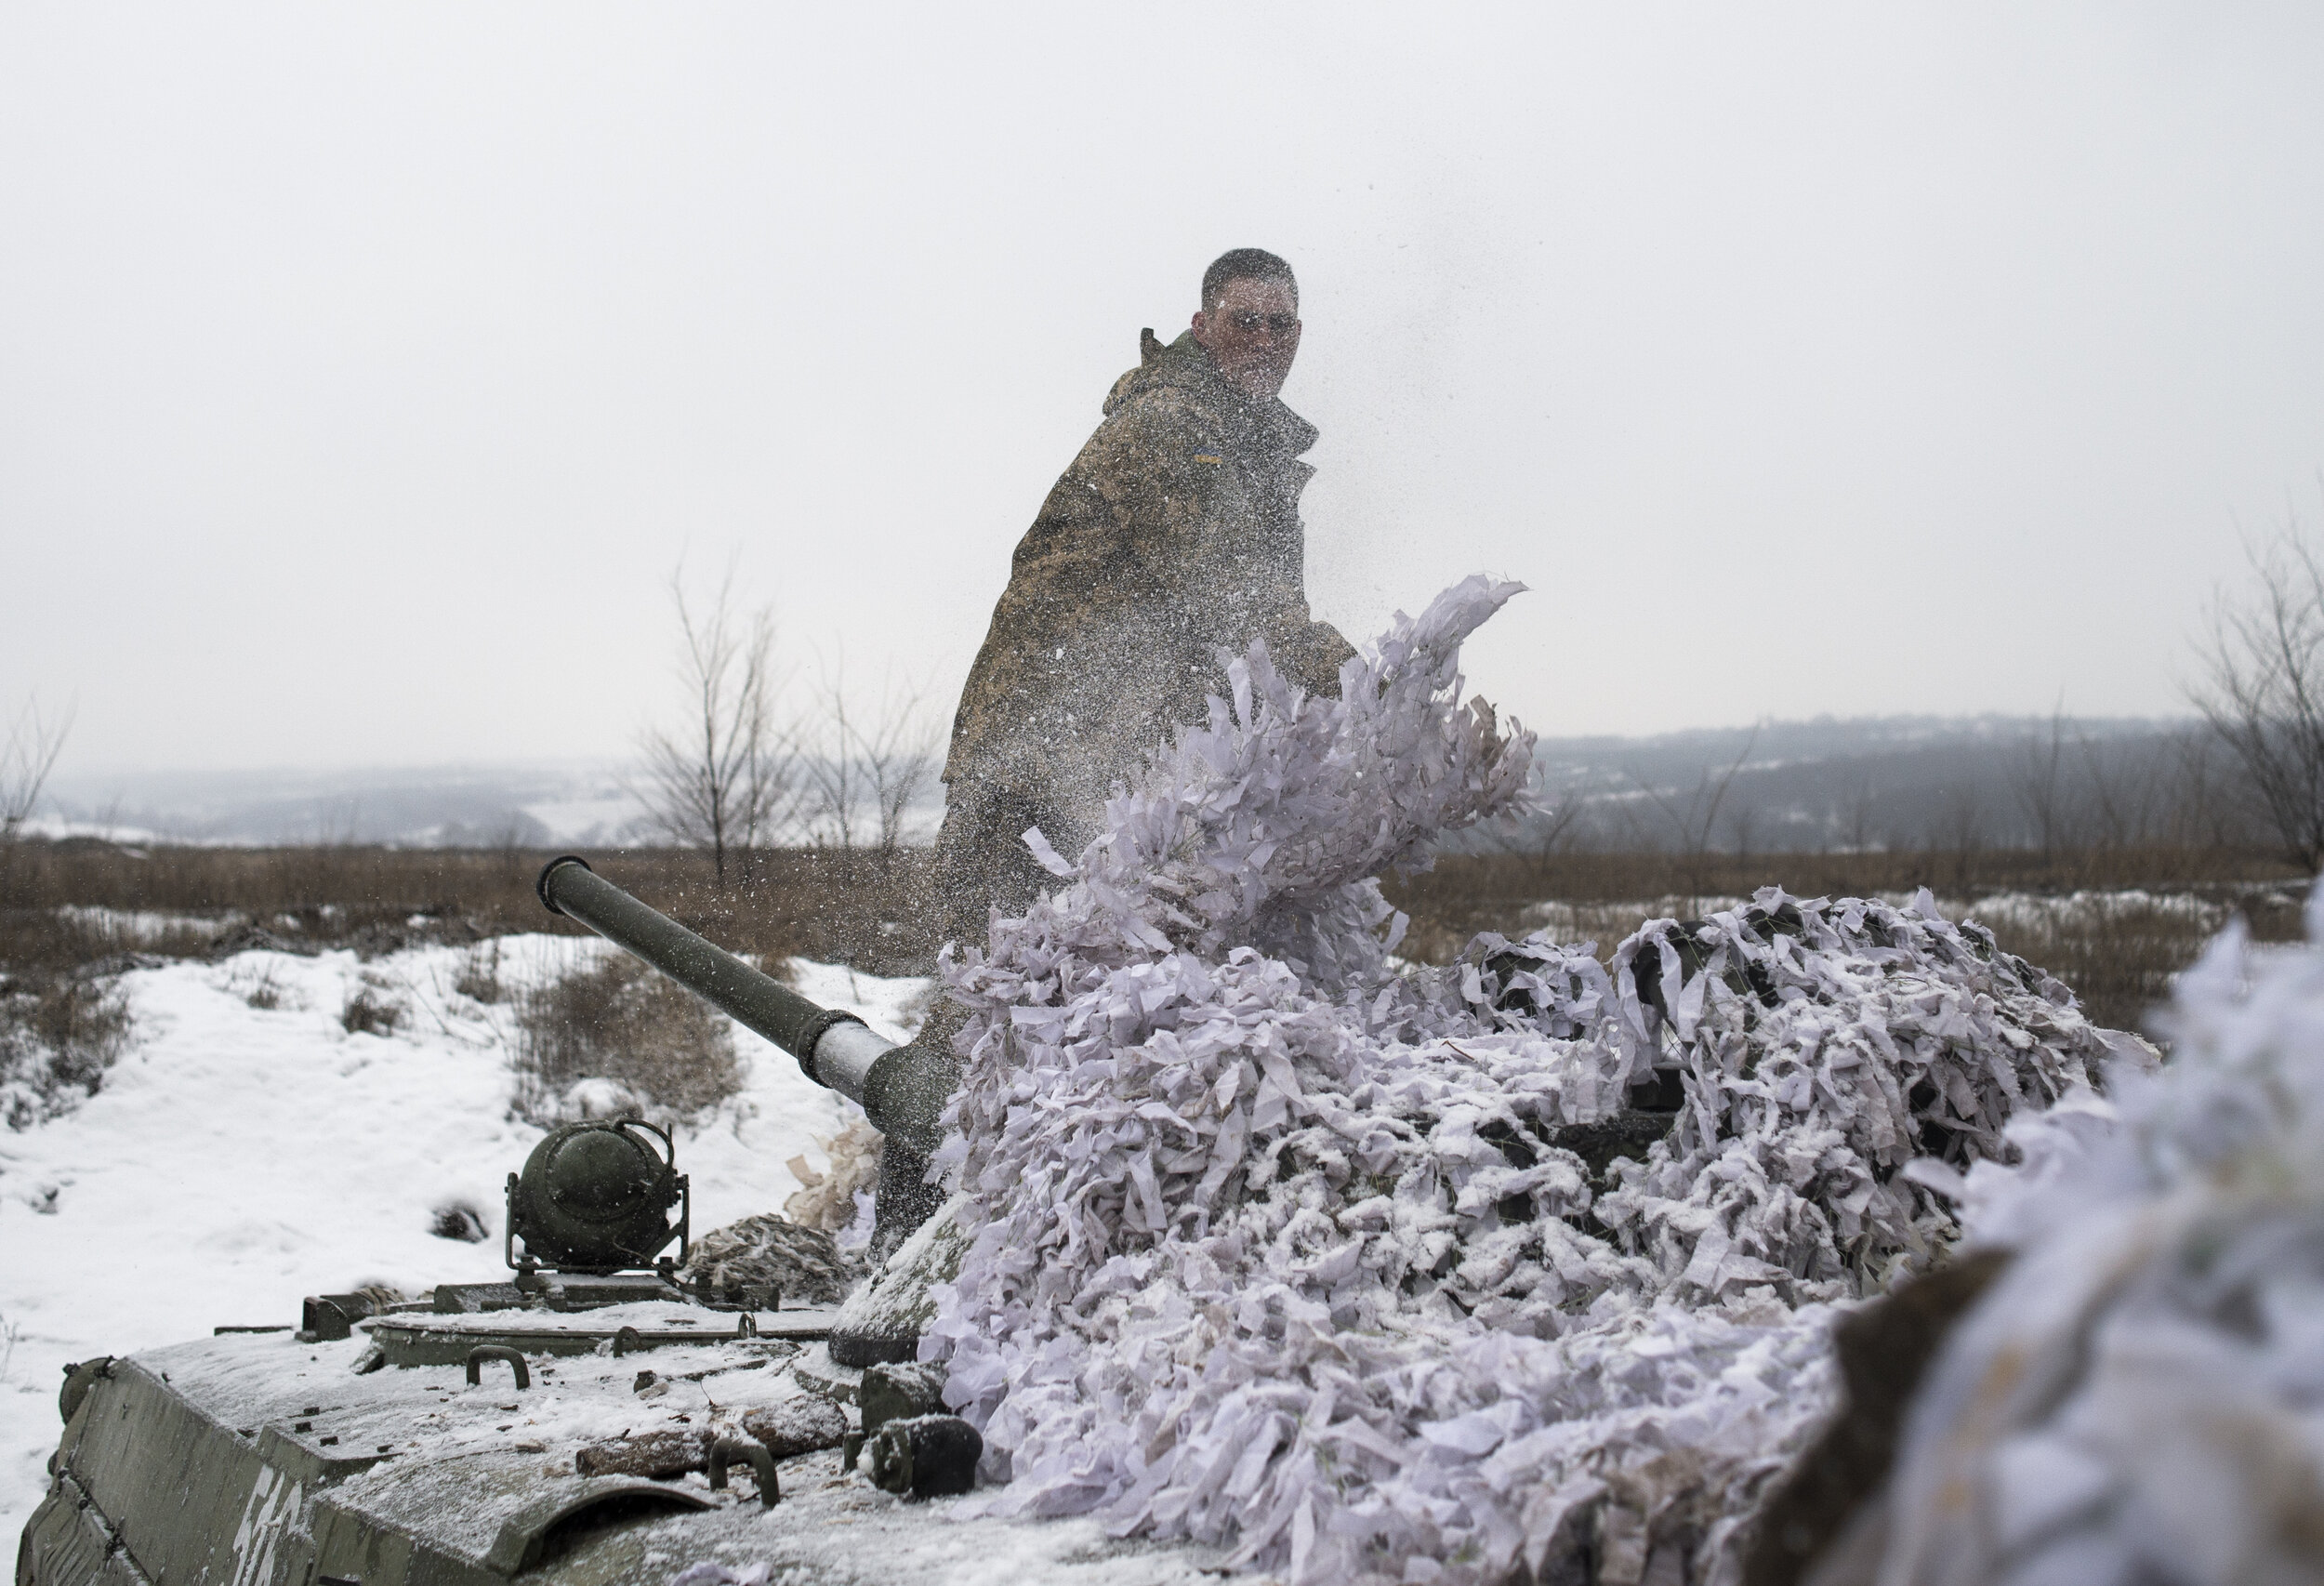  A Ukrainian soldier rips the netting off an armored personnel carrier on the outskirts of Zolote on the frontlines near Luhansk in eastern Ukraine. While many regard the Donbas War as a frozen conflict places on the frontlines such as Zolote and Avd